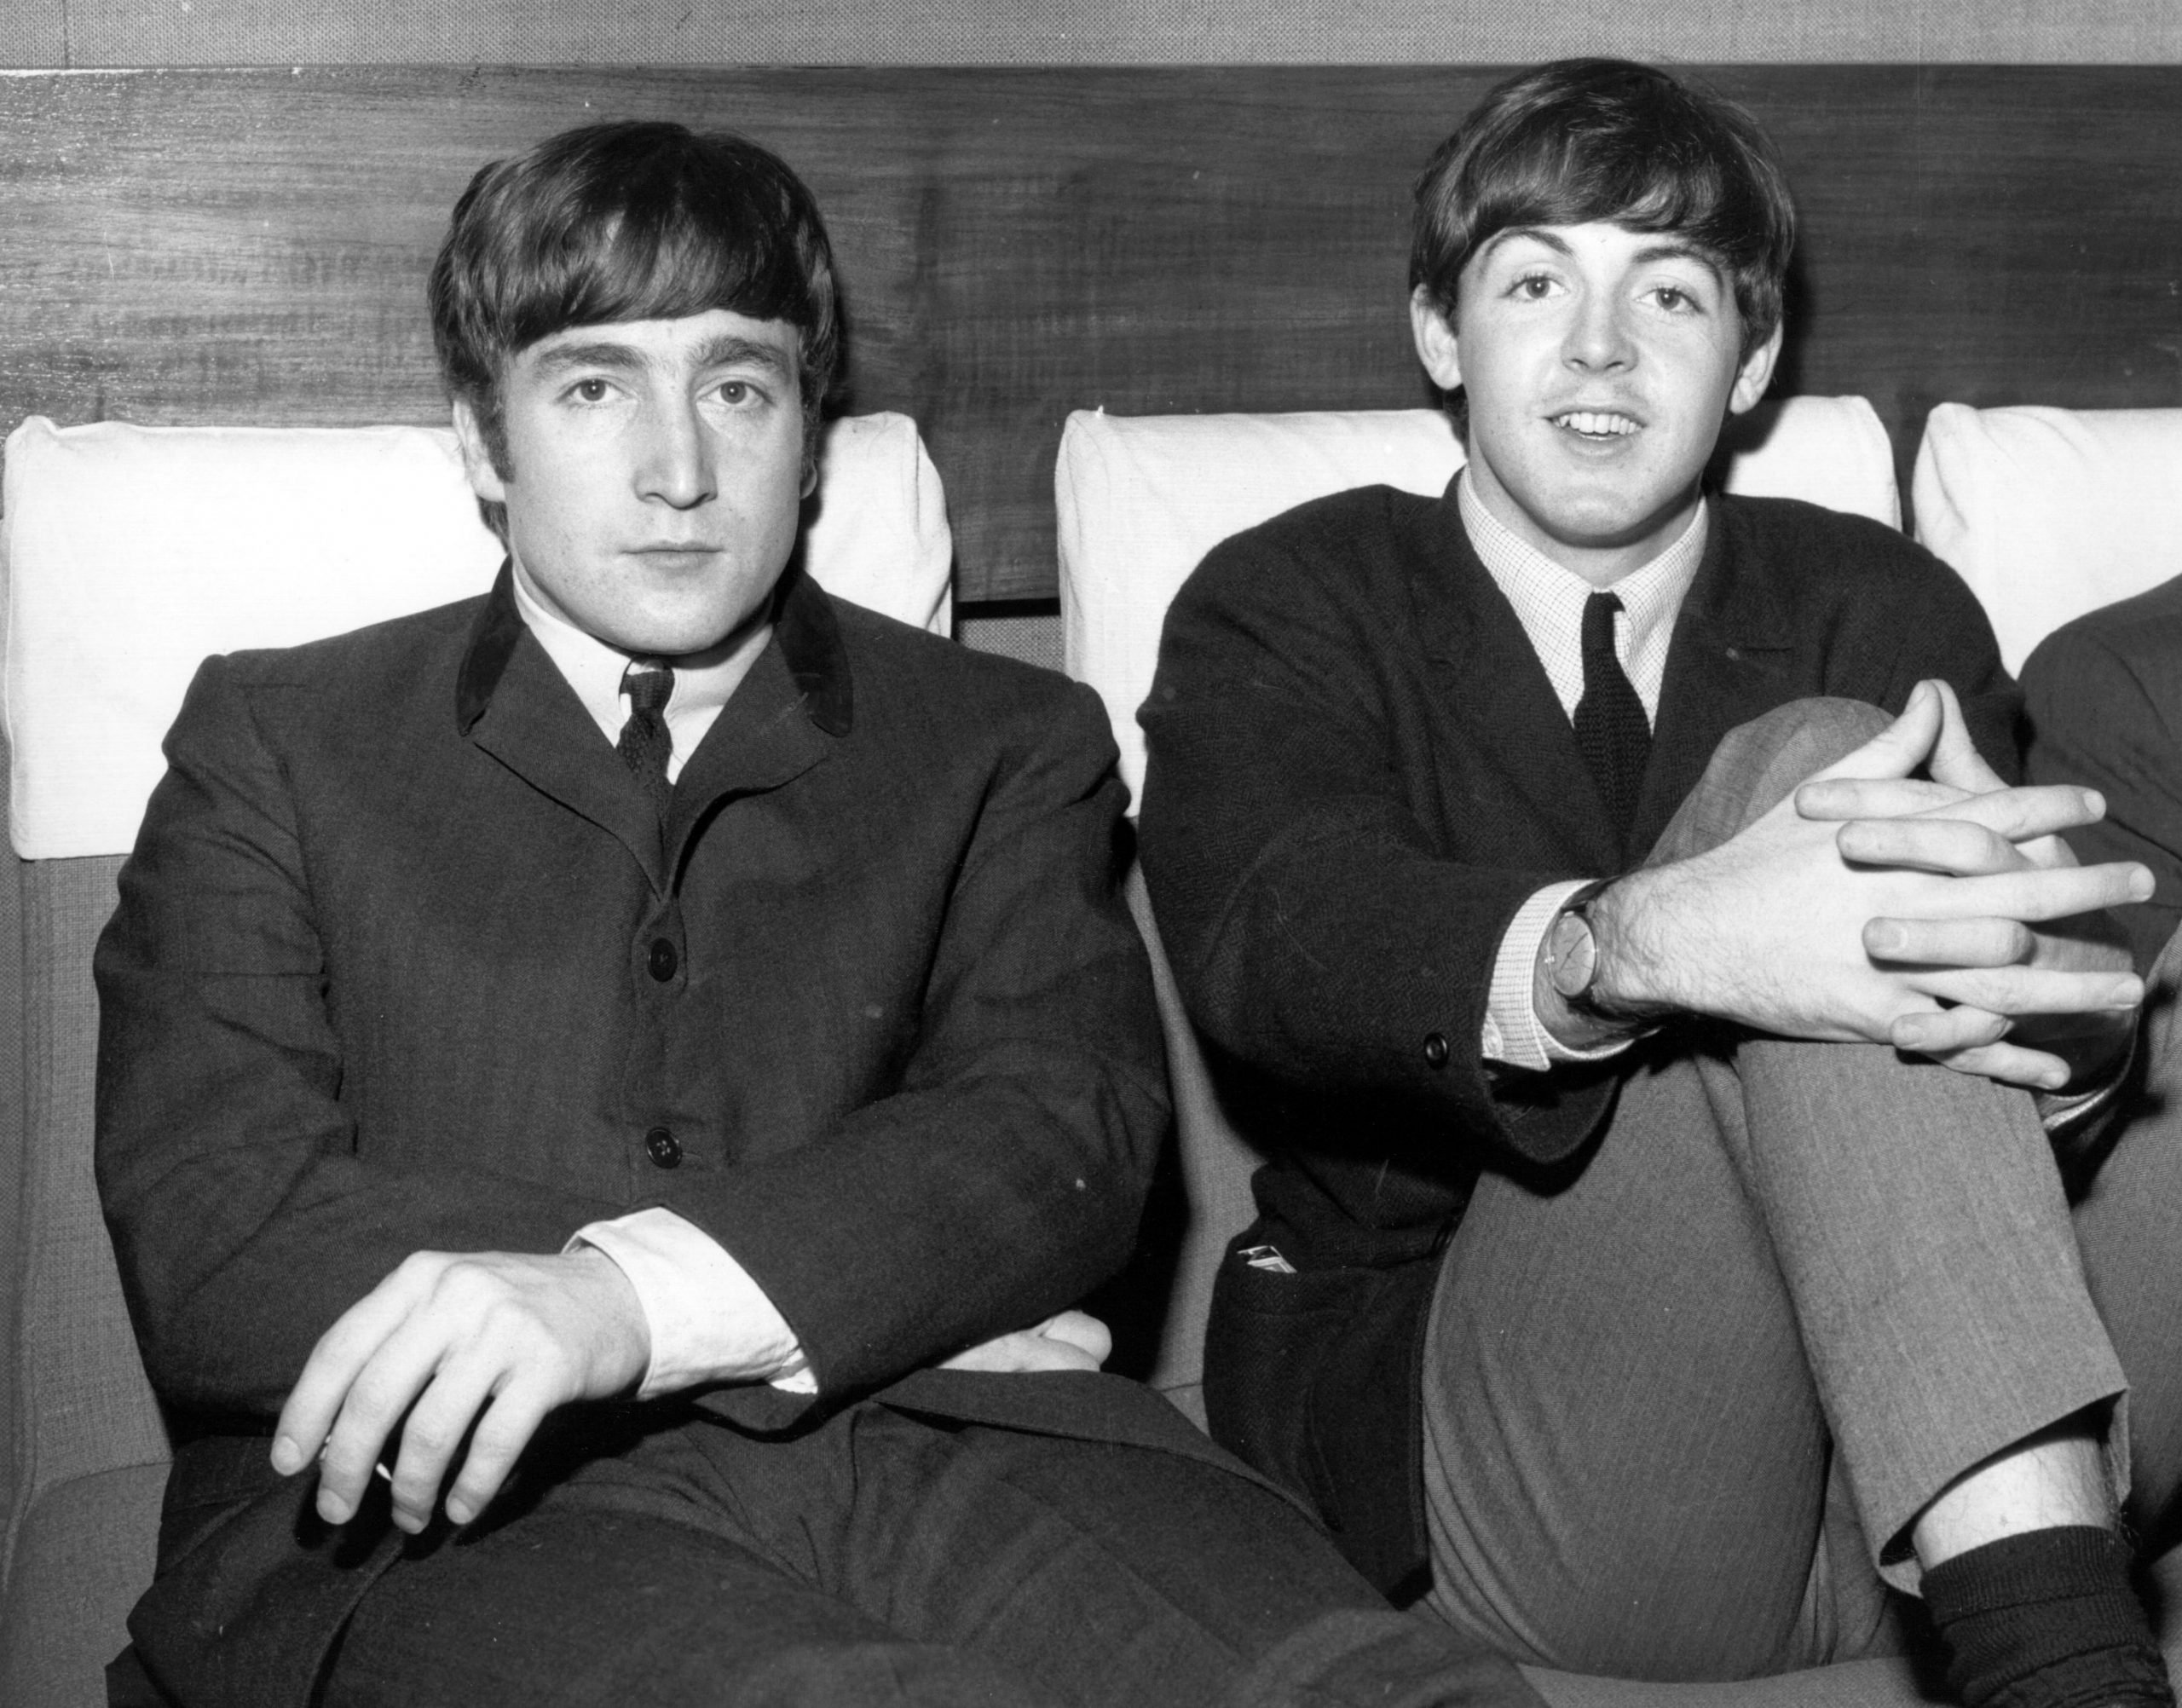 The Beatles' John Lennon and Paul McCartney wearing suits during the "Paperback Writer"